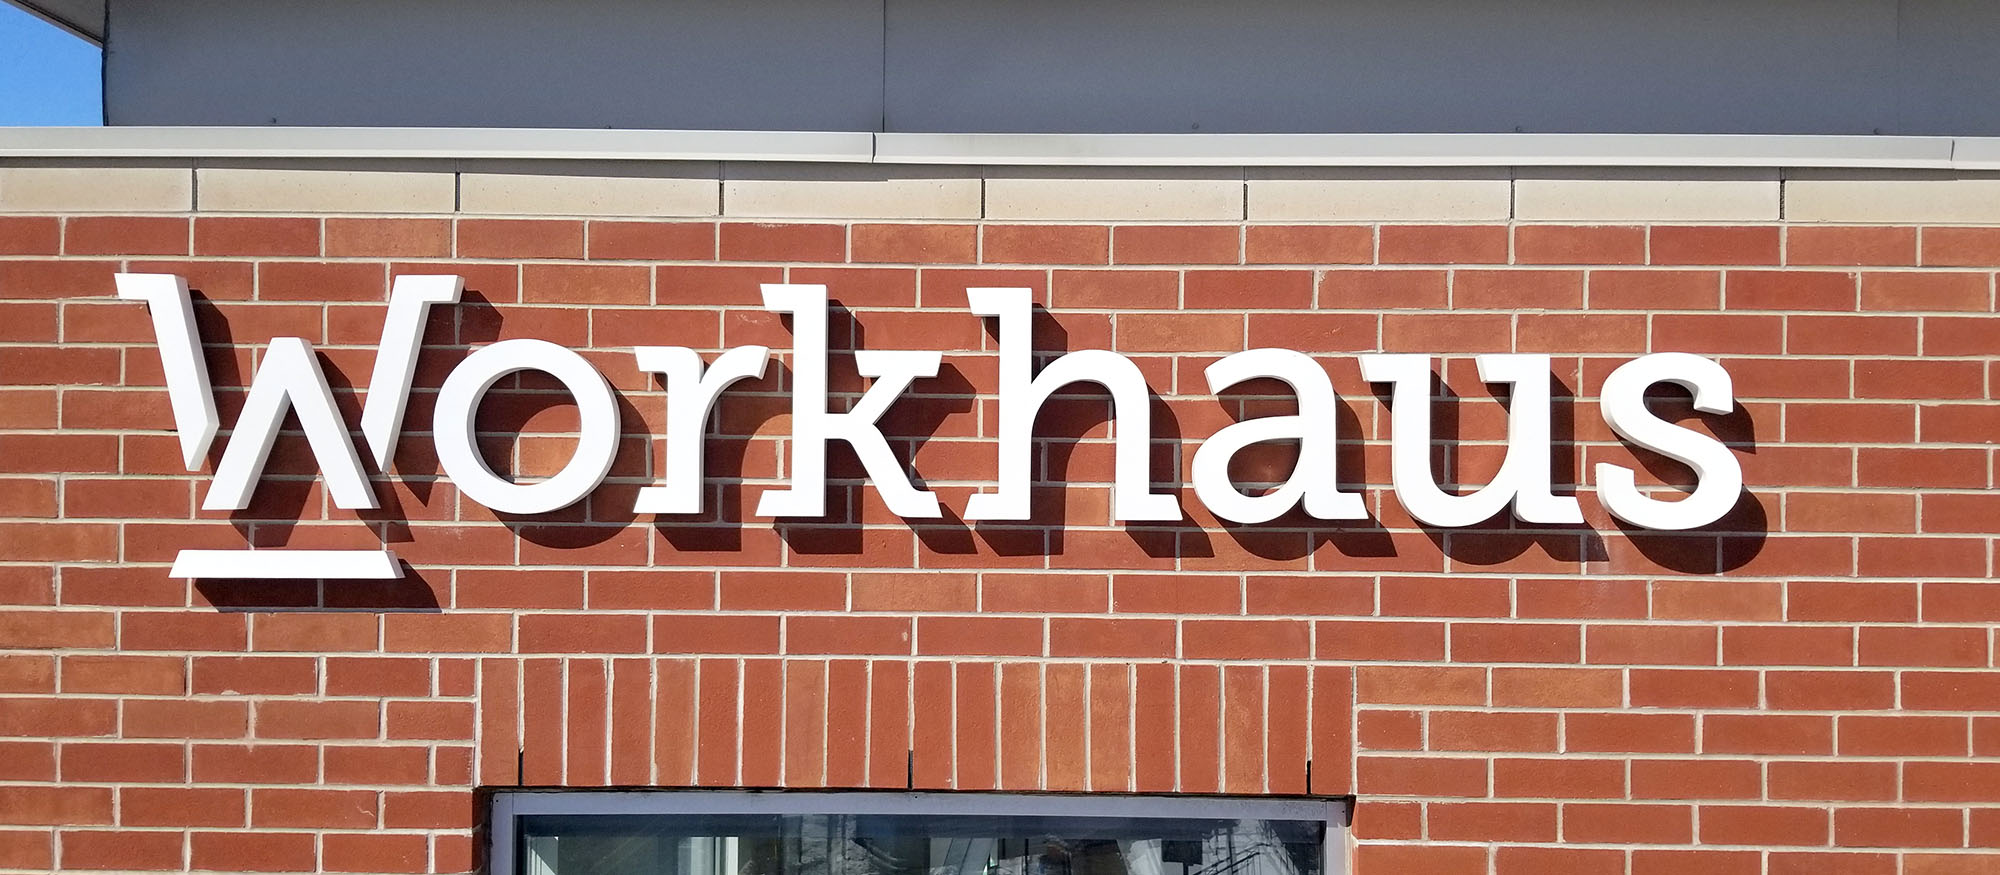 Best custom fabrication metal and acrylic Storefront signs in Newmarket. Workhaus Channel letters designed, fabrication and install Toronto, GTA, Richmond Hill, Vaughan, York Region and Ontario